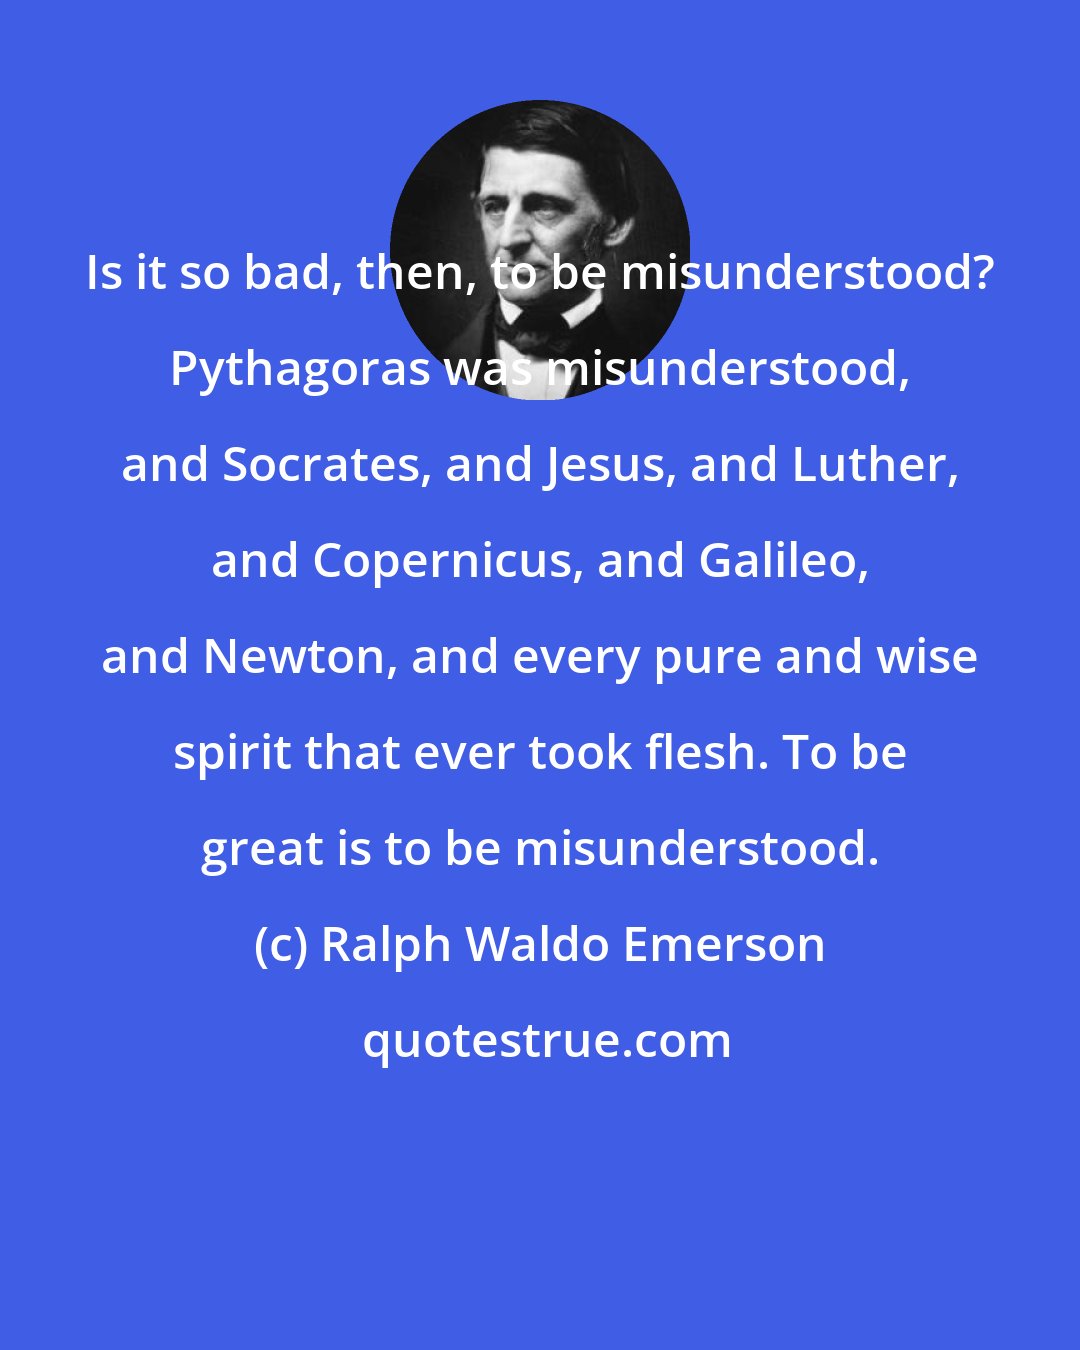 Ralph Waldo Emerson: Is it so bad, then, to be misunderstood? Pythagoras was misunderstood, and Socrates, and Jesus, and Luther, and Copernicus, and Galileo, and Newton, and every pure and wise spirit that ever took flesh. To be great is to be misunderstood.